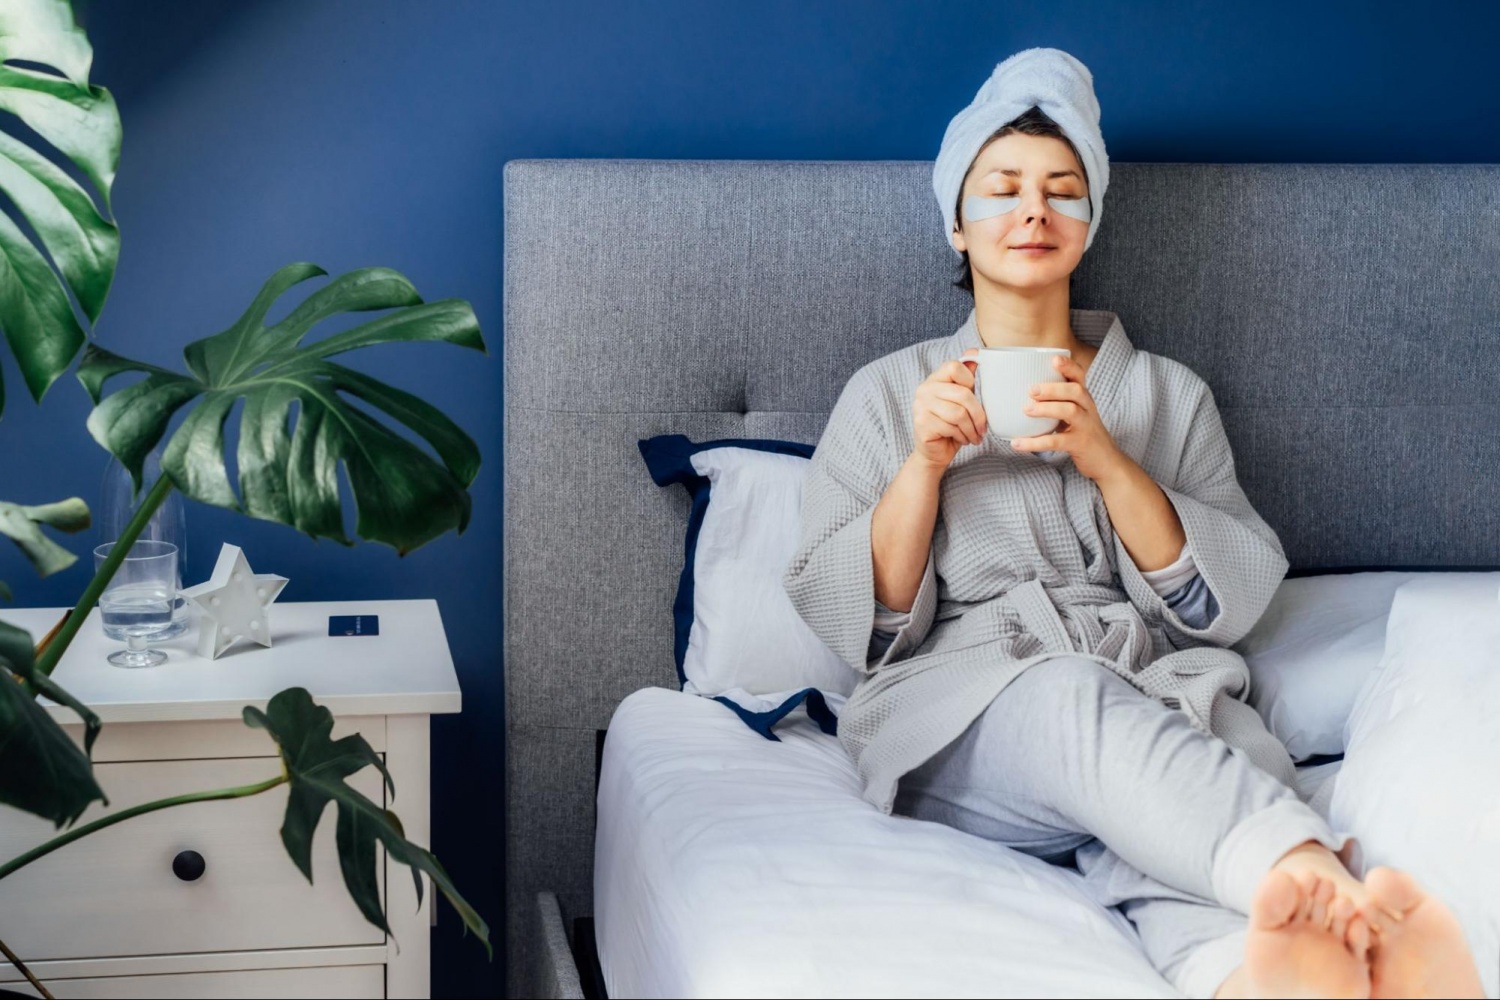 12 Simple Ways To Infuse Self-Care Into Your Routine Amid